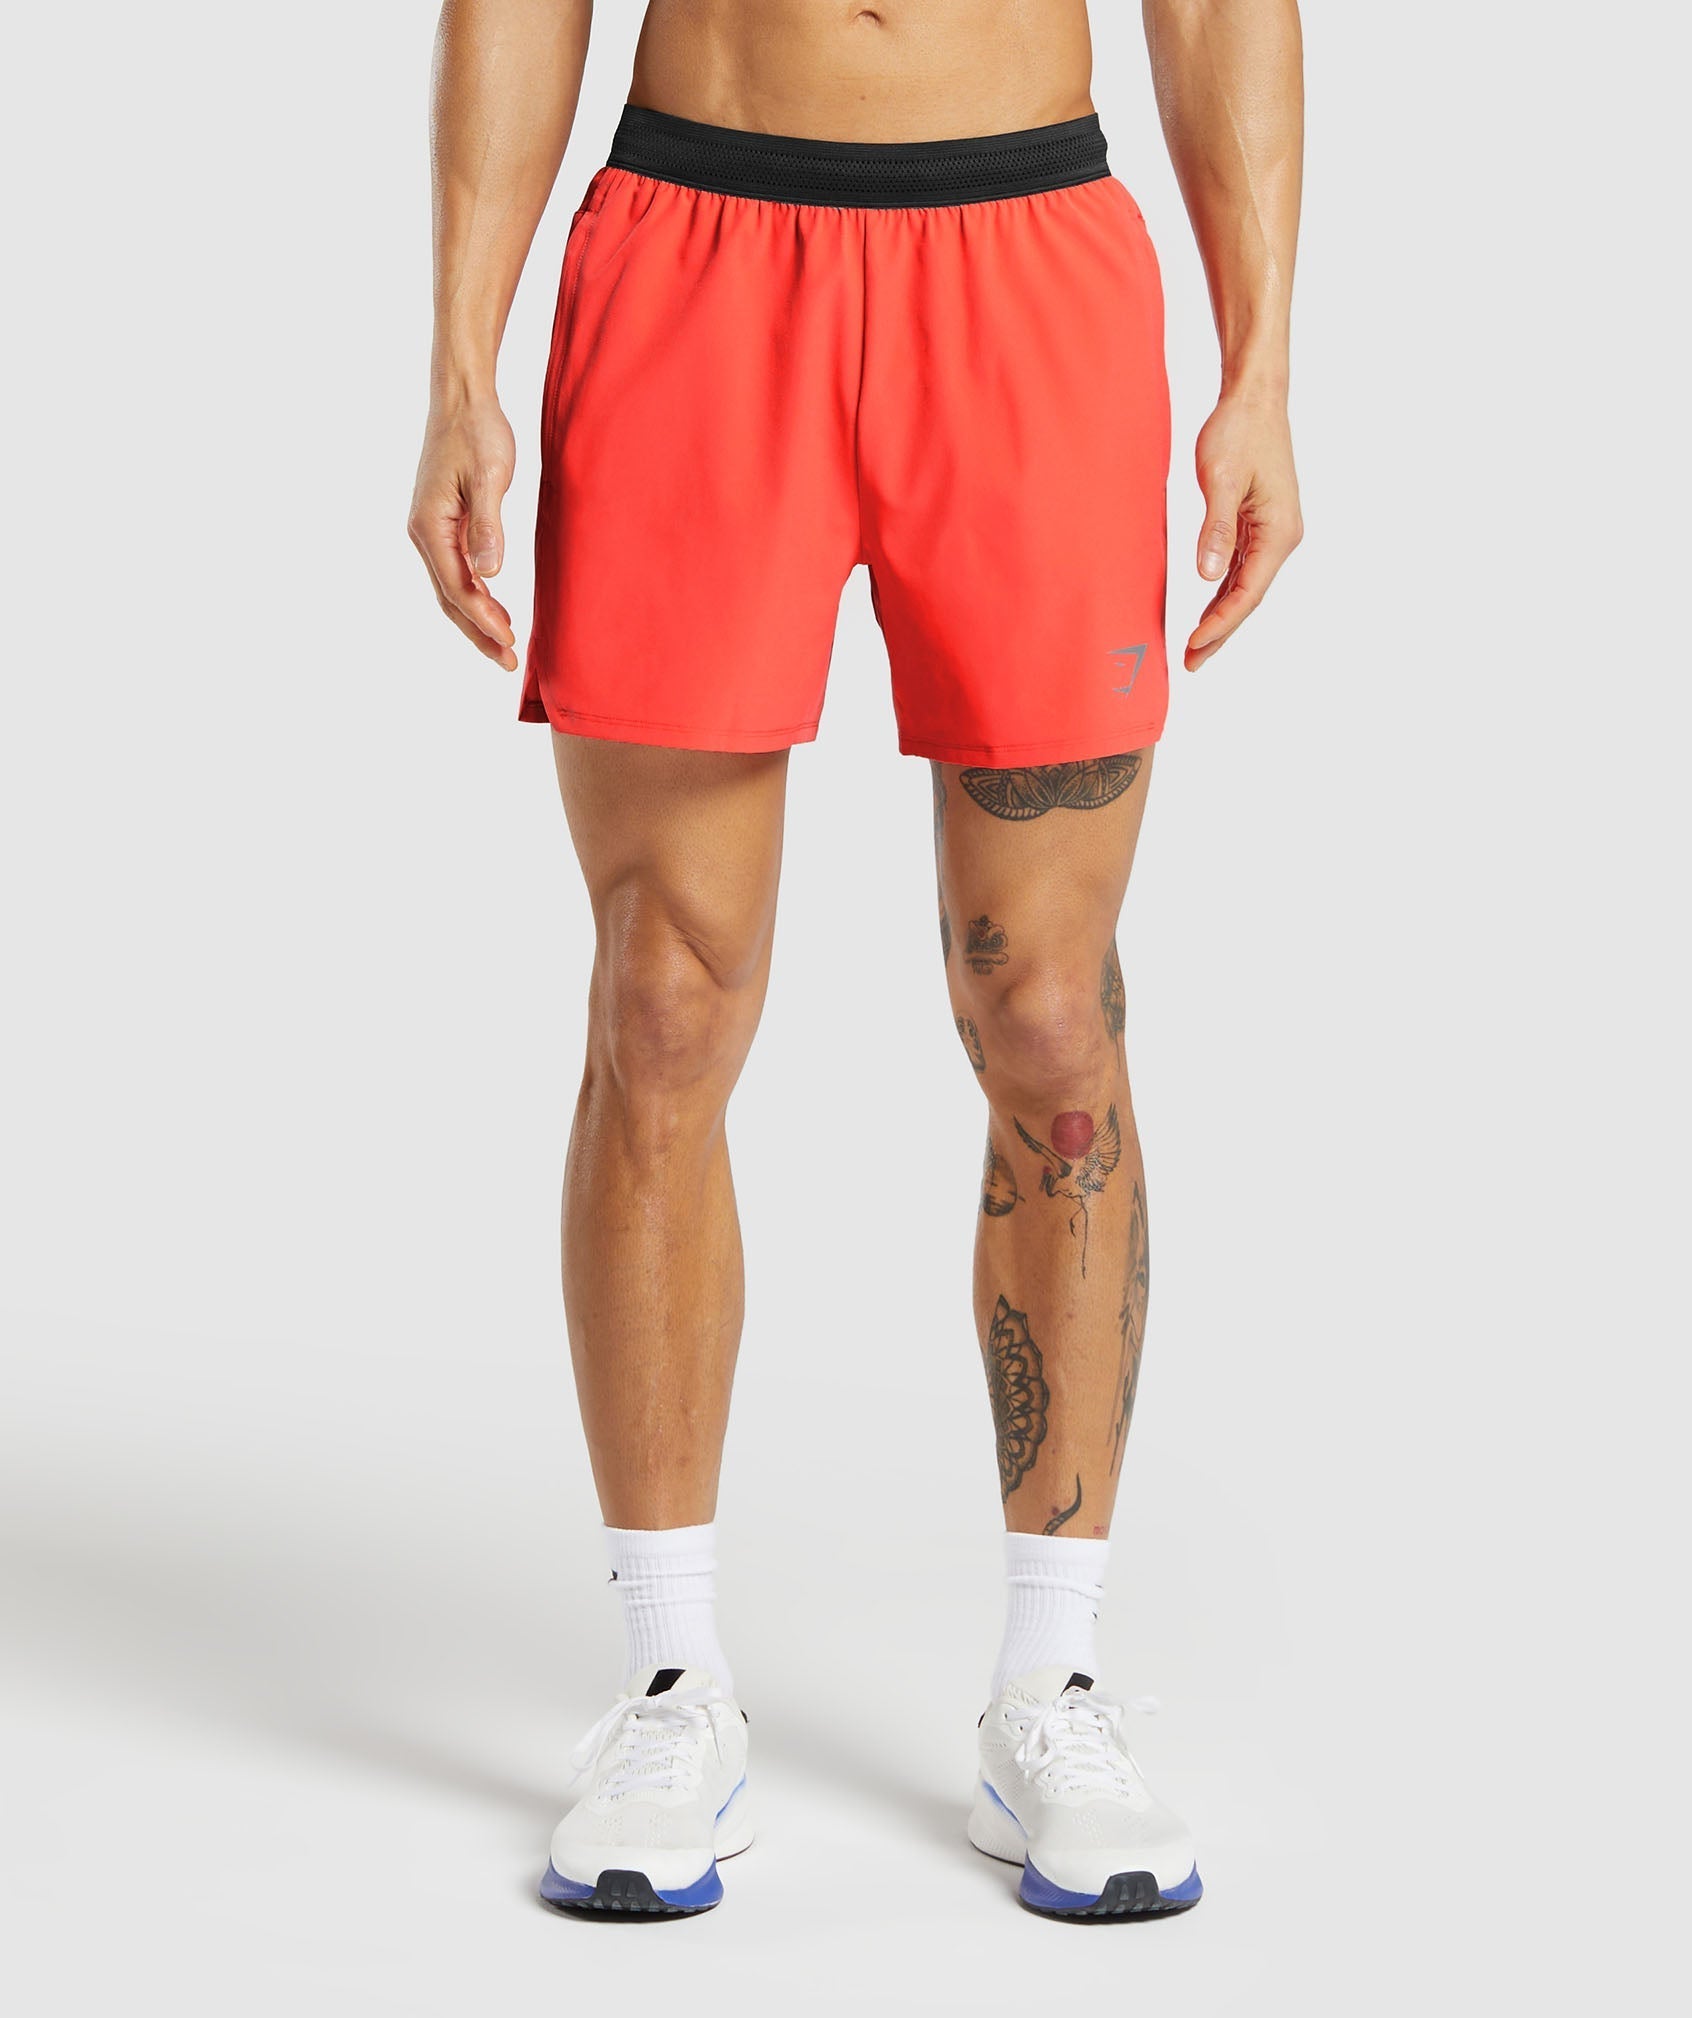 Speed 5" Shorts in Wannabe Orange is out of stock